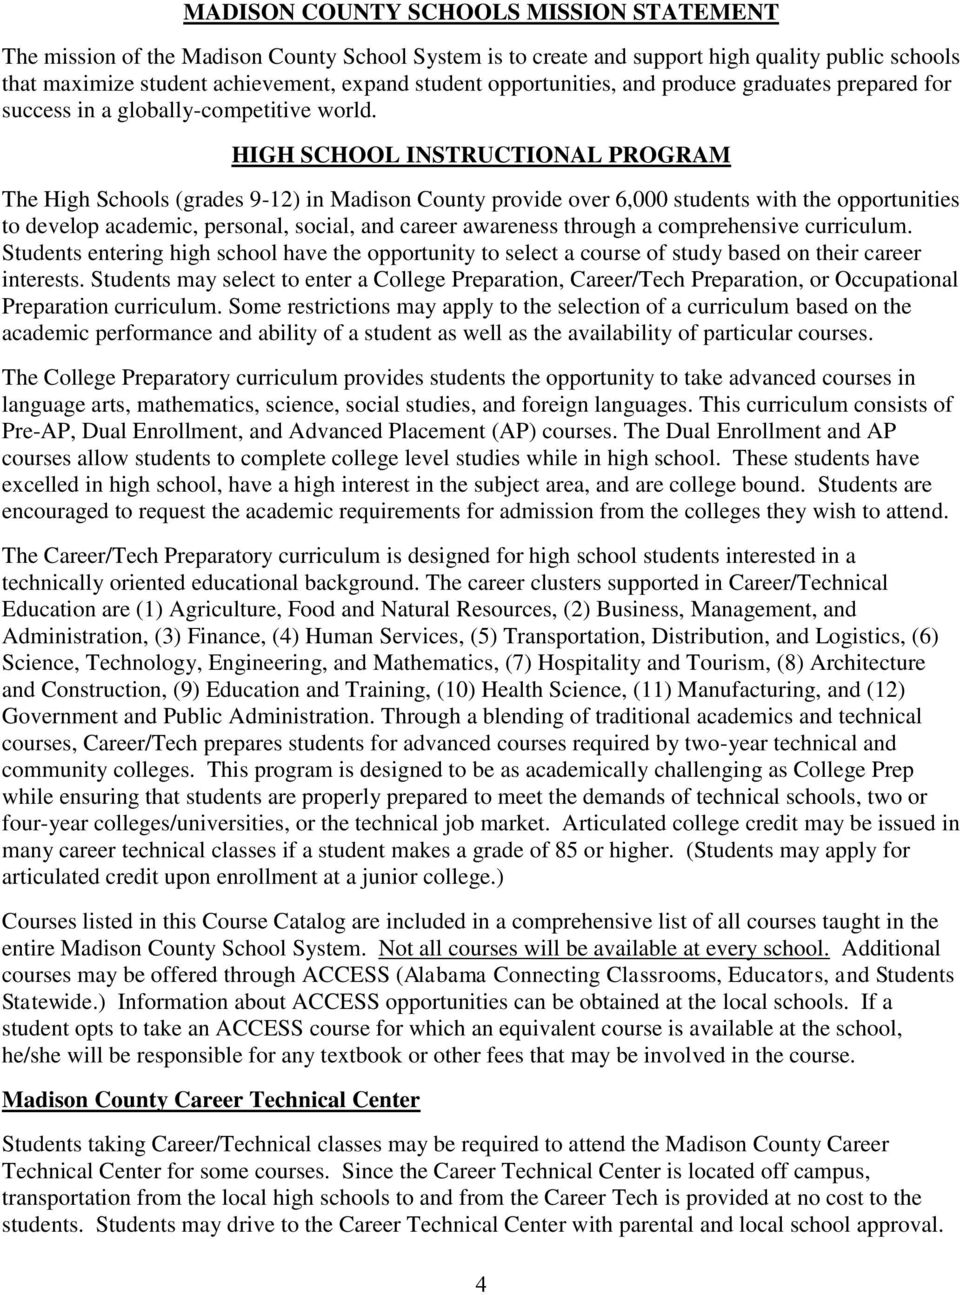 HIGH SCHOOL INSTRUCTIONAL PROGRAM The High Schools (grades 9-12) in Madison County provide over 6,000 students with the opportunities to develop academic, personal, social, and career awareness